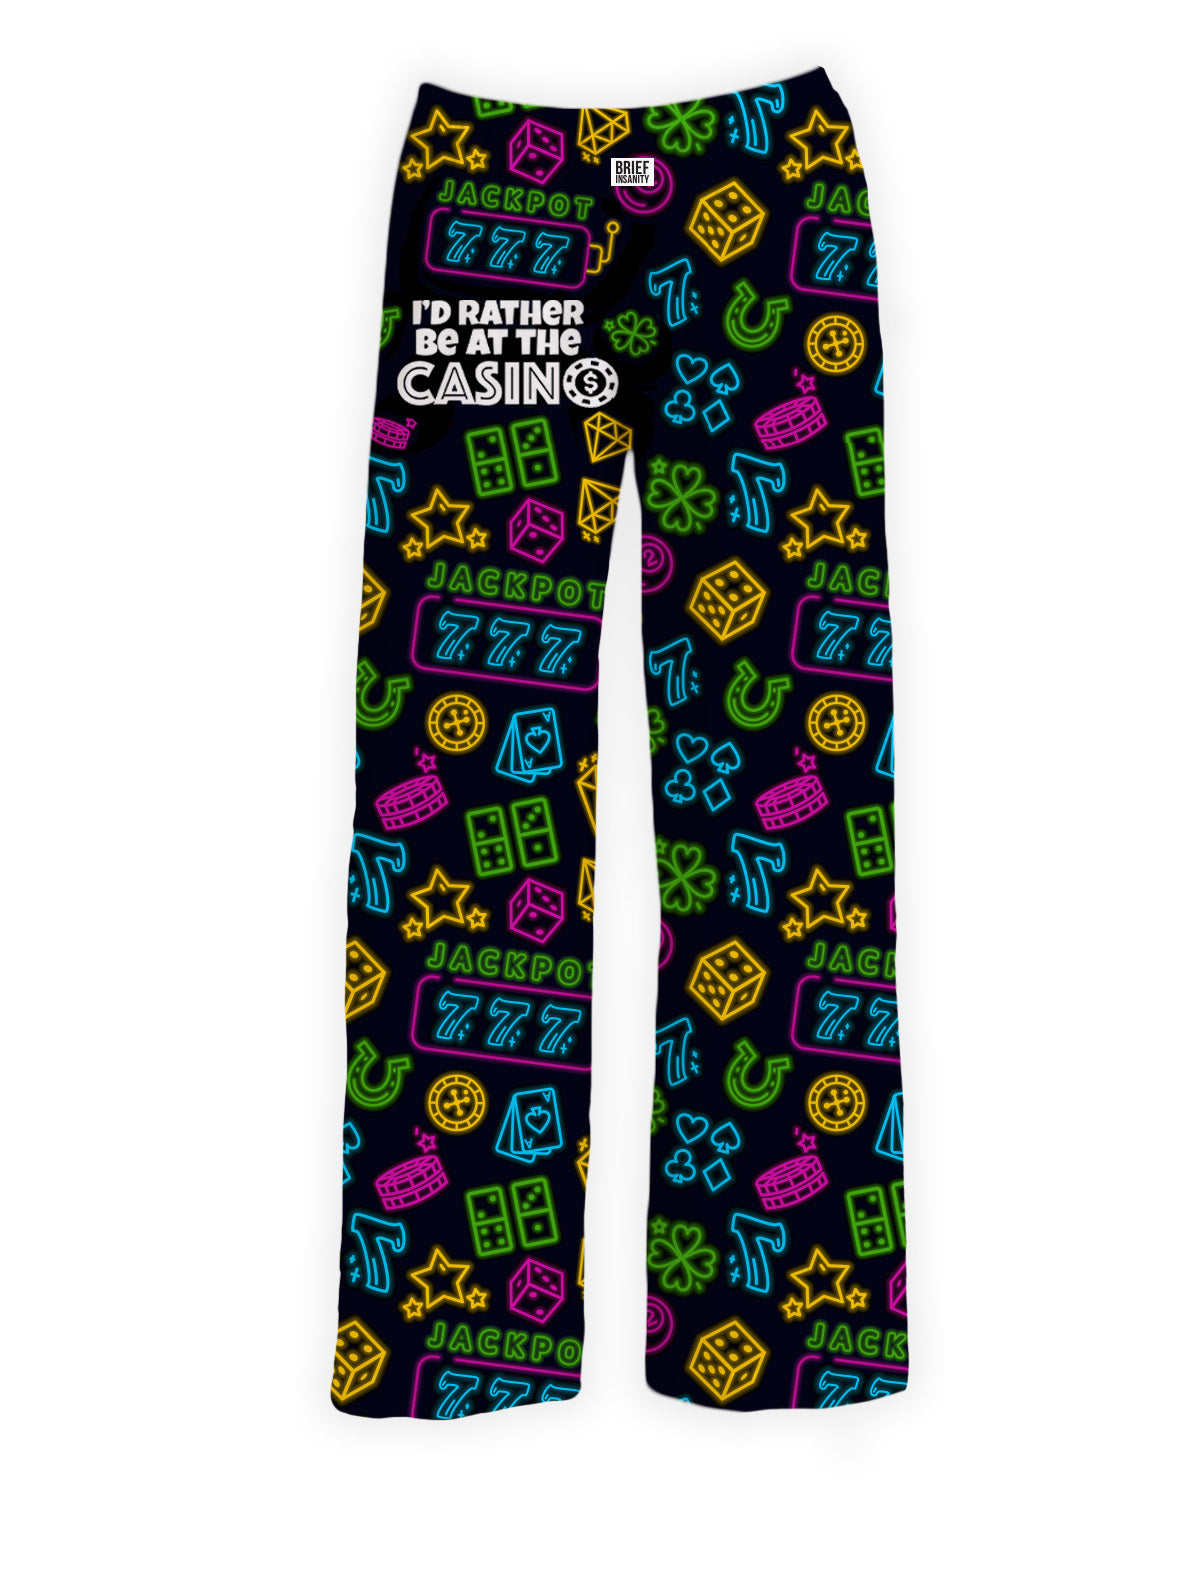 BRIEF INSANITY's I'd Rather Be At The Casino Pajama Lounge Pants